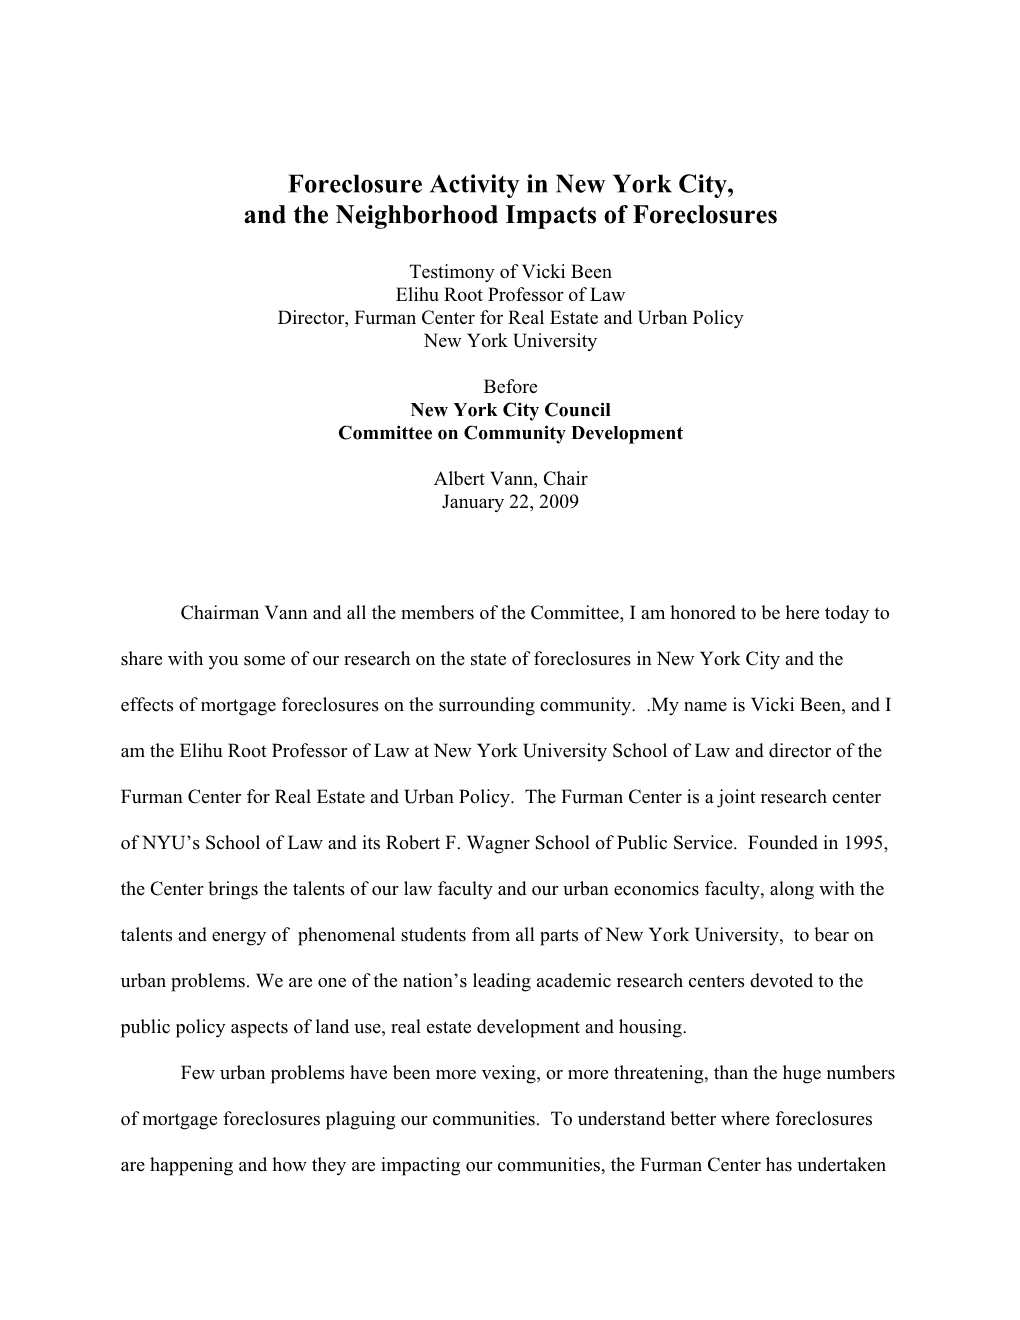 Foreclosure Activity in New York City, and the Neighborhood Impacts of Foreclosures